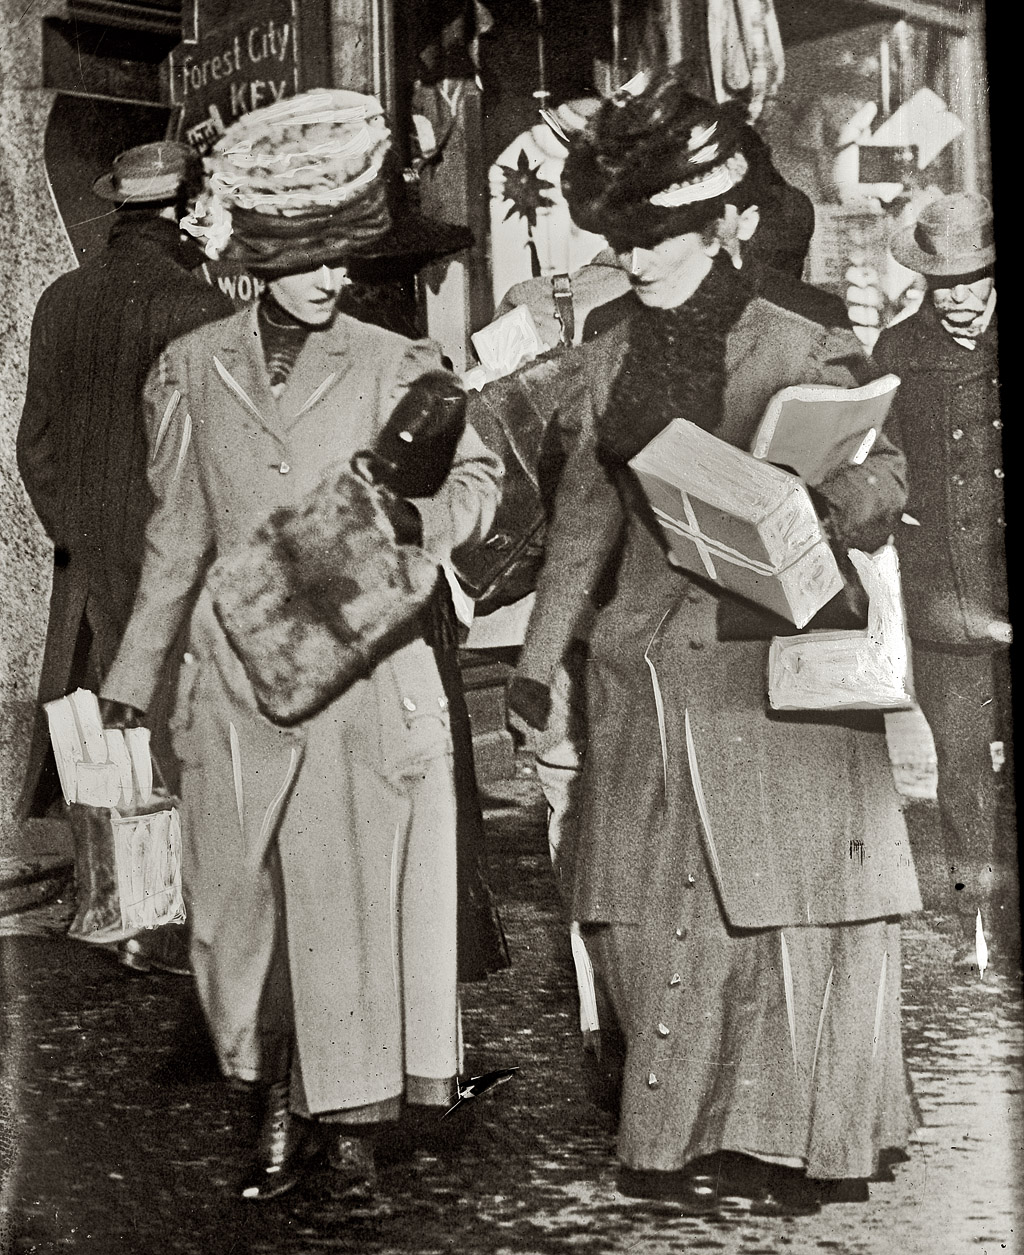 Christmas shoppers in New York City. Photo from the Bain News Service collection, between 1910 and 1915. View full size.